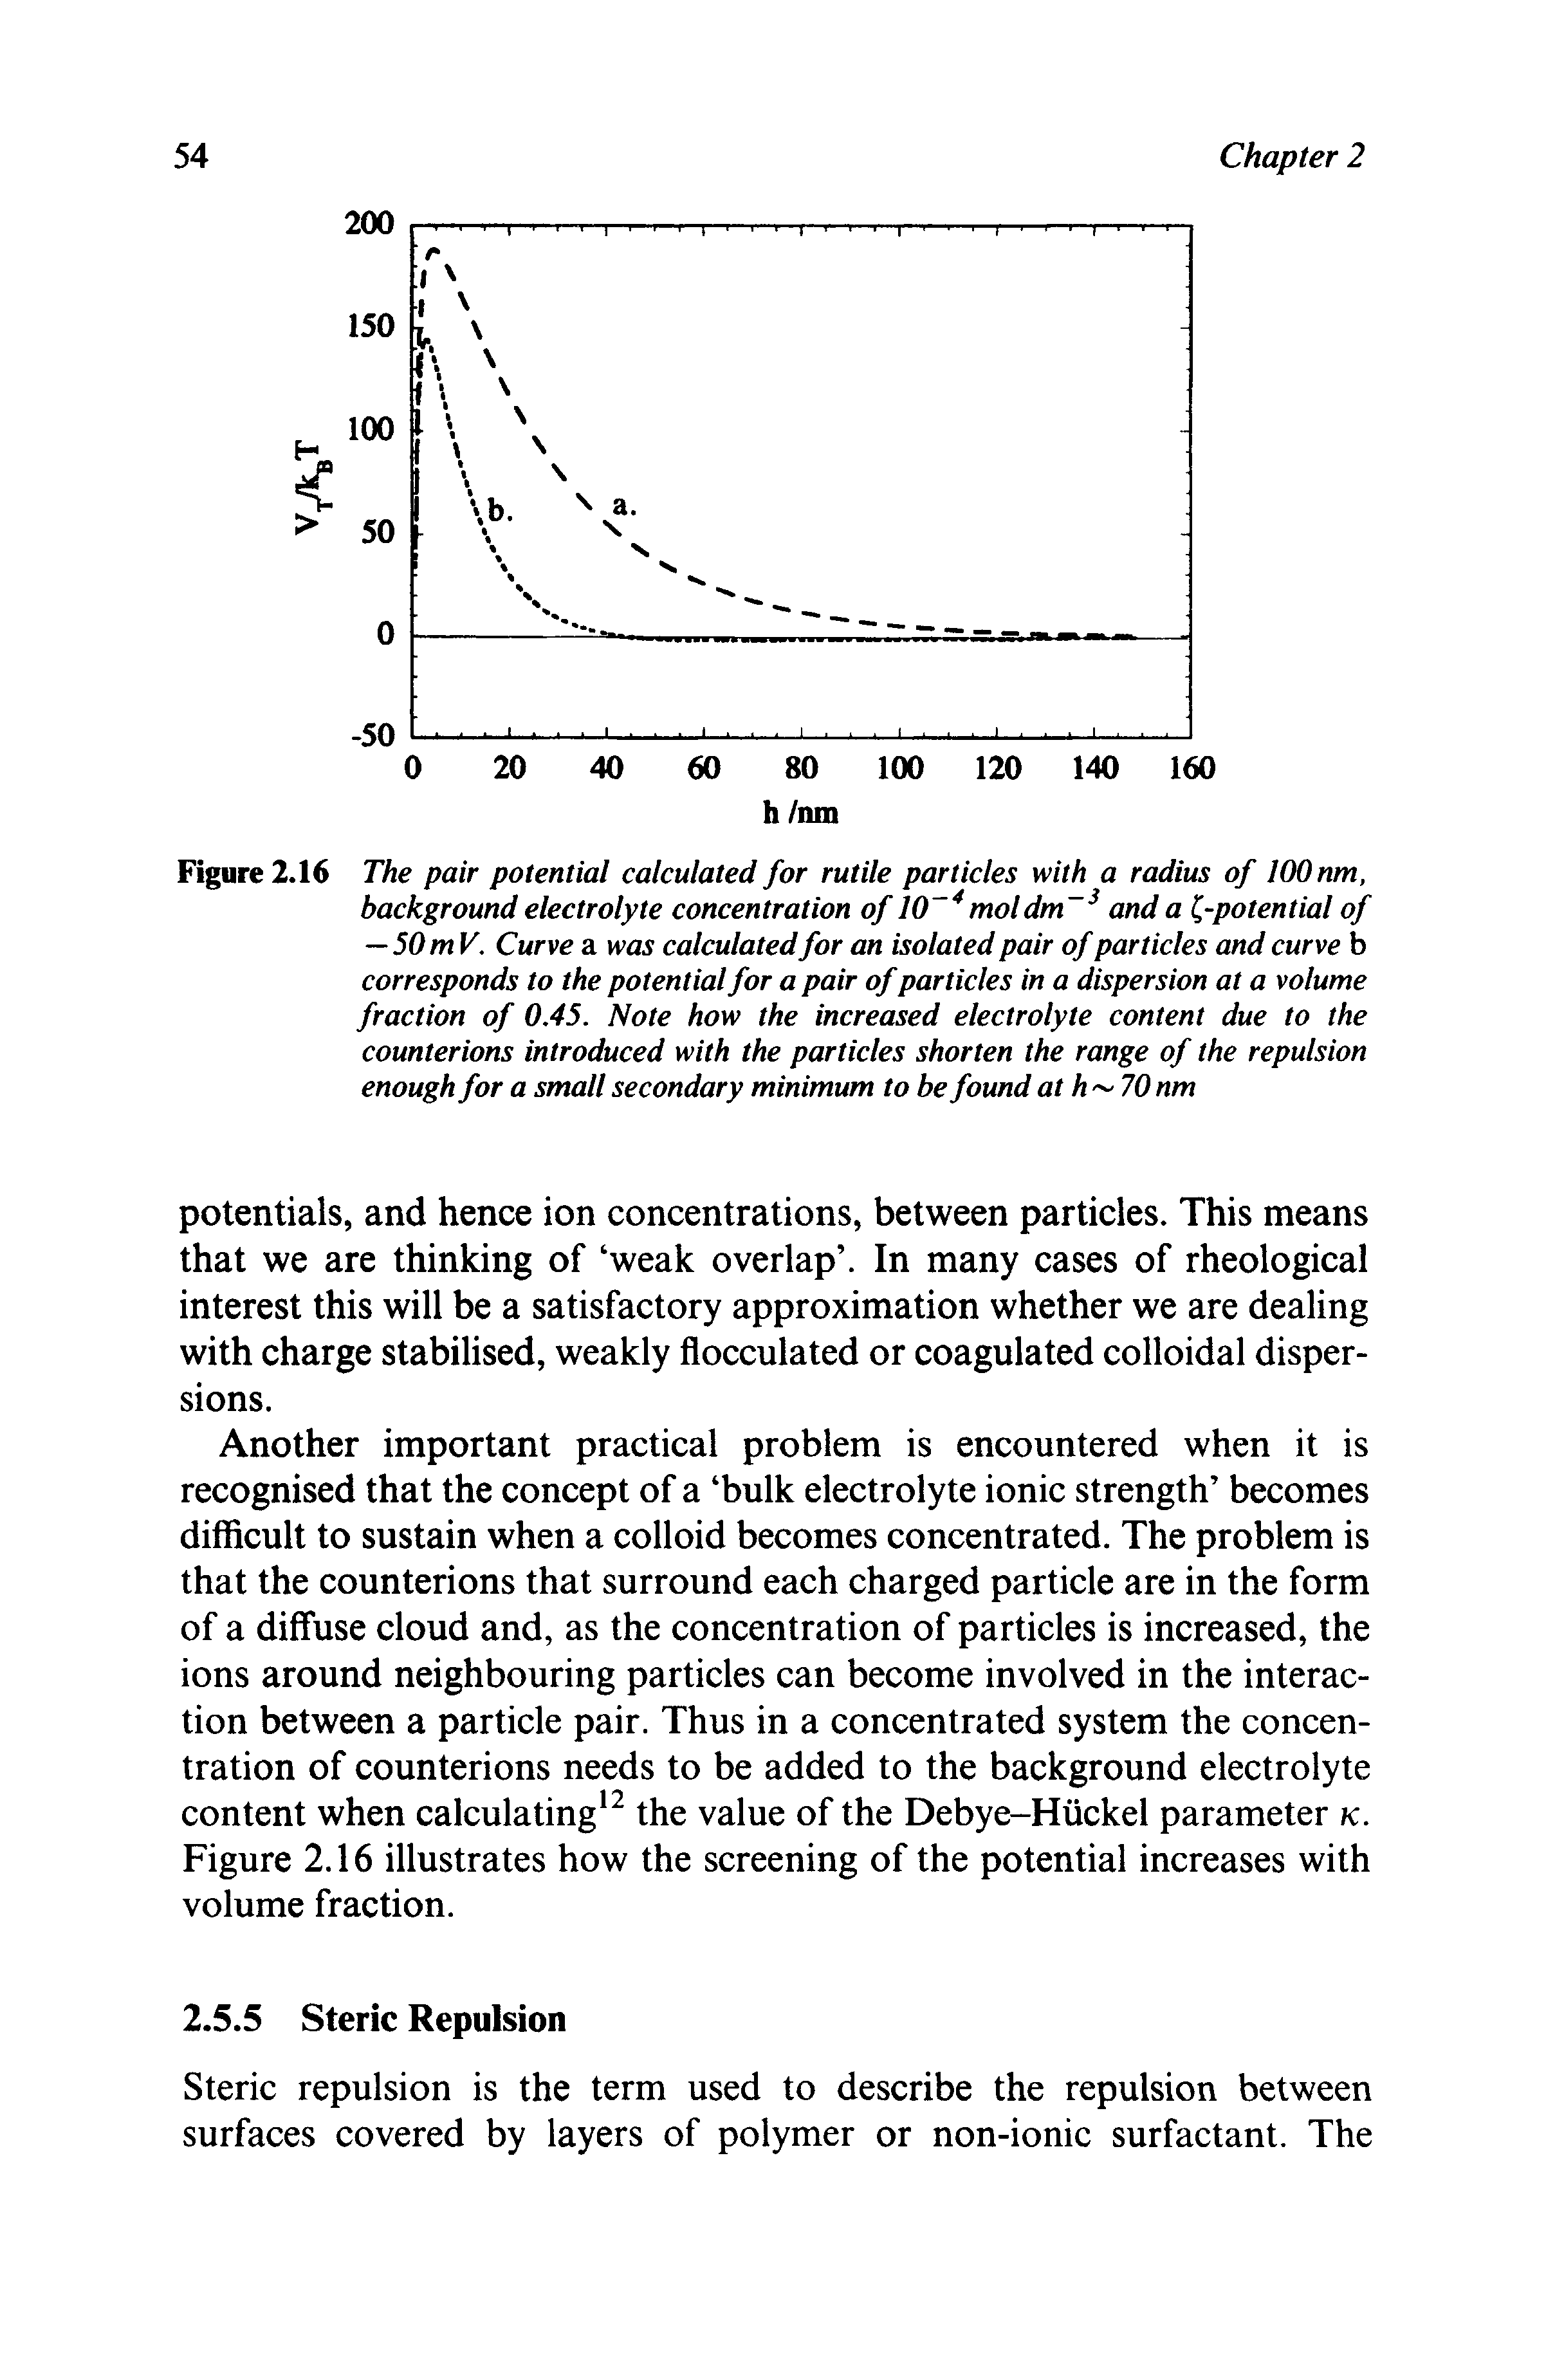 Figure 2.16 The pair potential calculated for rutile particles with a radius of 100 nm, background electrolyte concentration of 10 4moldm 3 and a -potential of —50 mV. Curve a was calculated for an isolated pair of particles and curve b corresponds to the potential for a pair ofparticles in a dispersion at a volume fraction of 0.45. Note how the increased electrolyte content due to the counterions introduced with the particles shorten the range of the repulsion enough for a small secondary minimum to be found at h 70 nm...